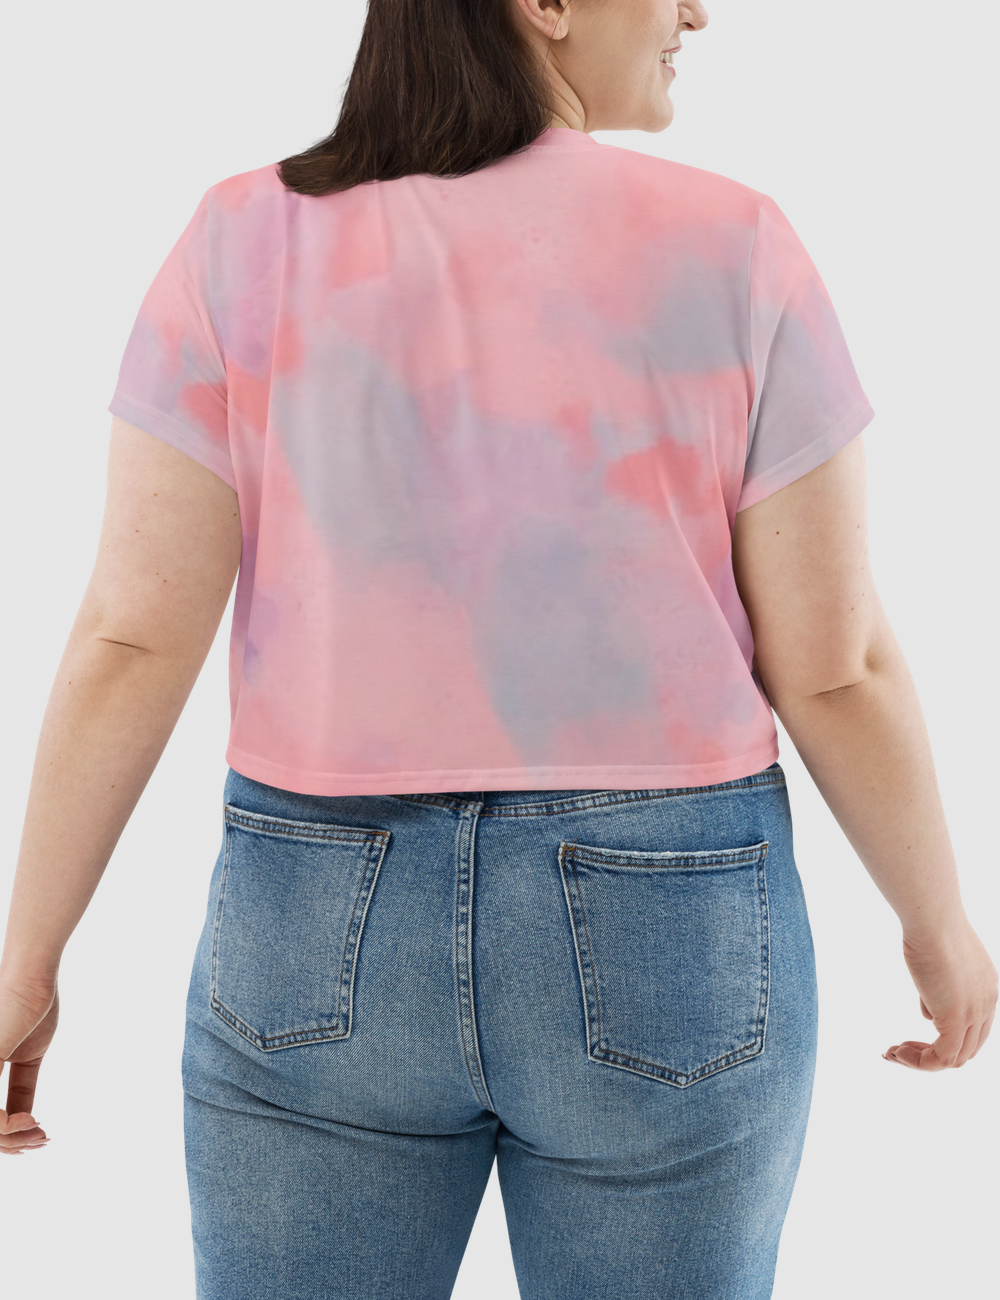 Abstract Light Pink Tie Dye Women's Sublimated Crop Top T-Shirt OniTakai